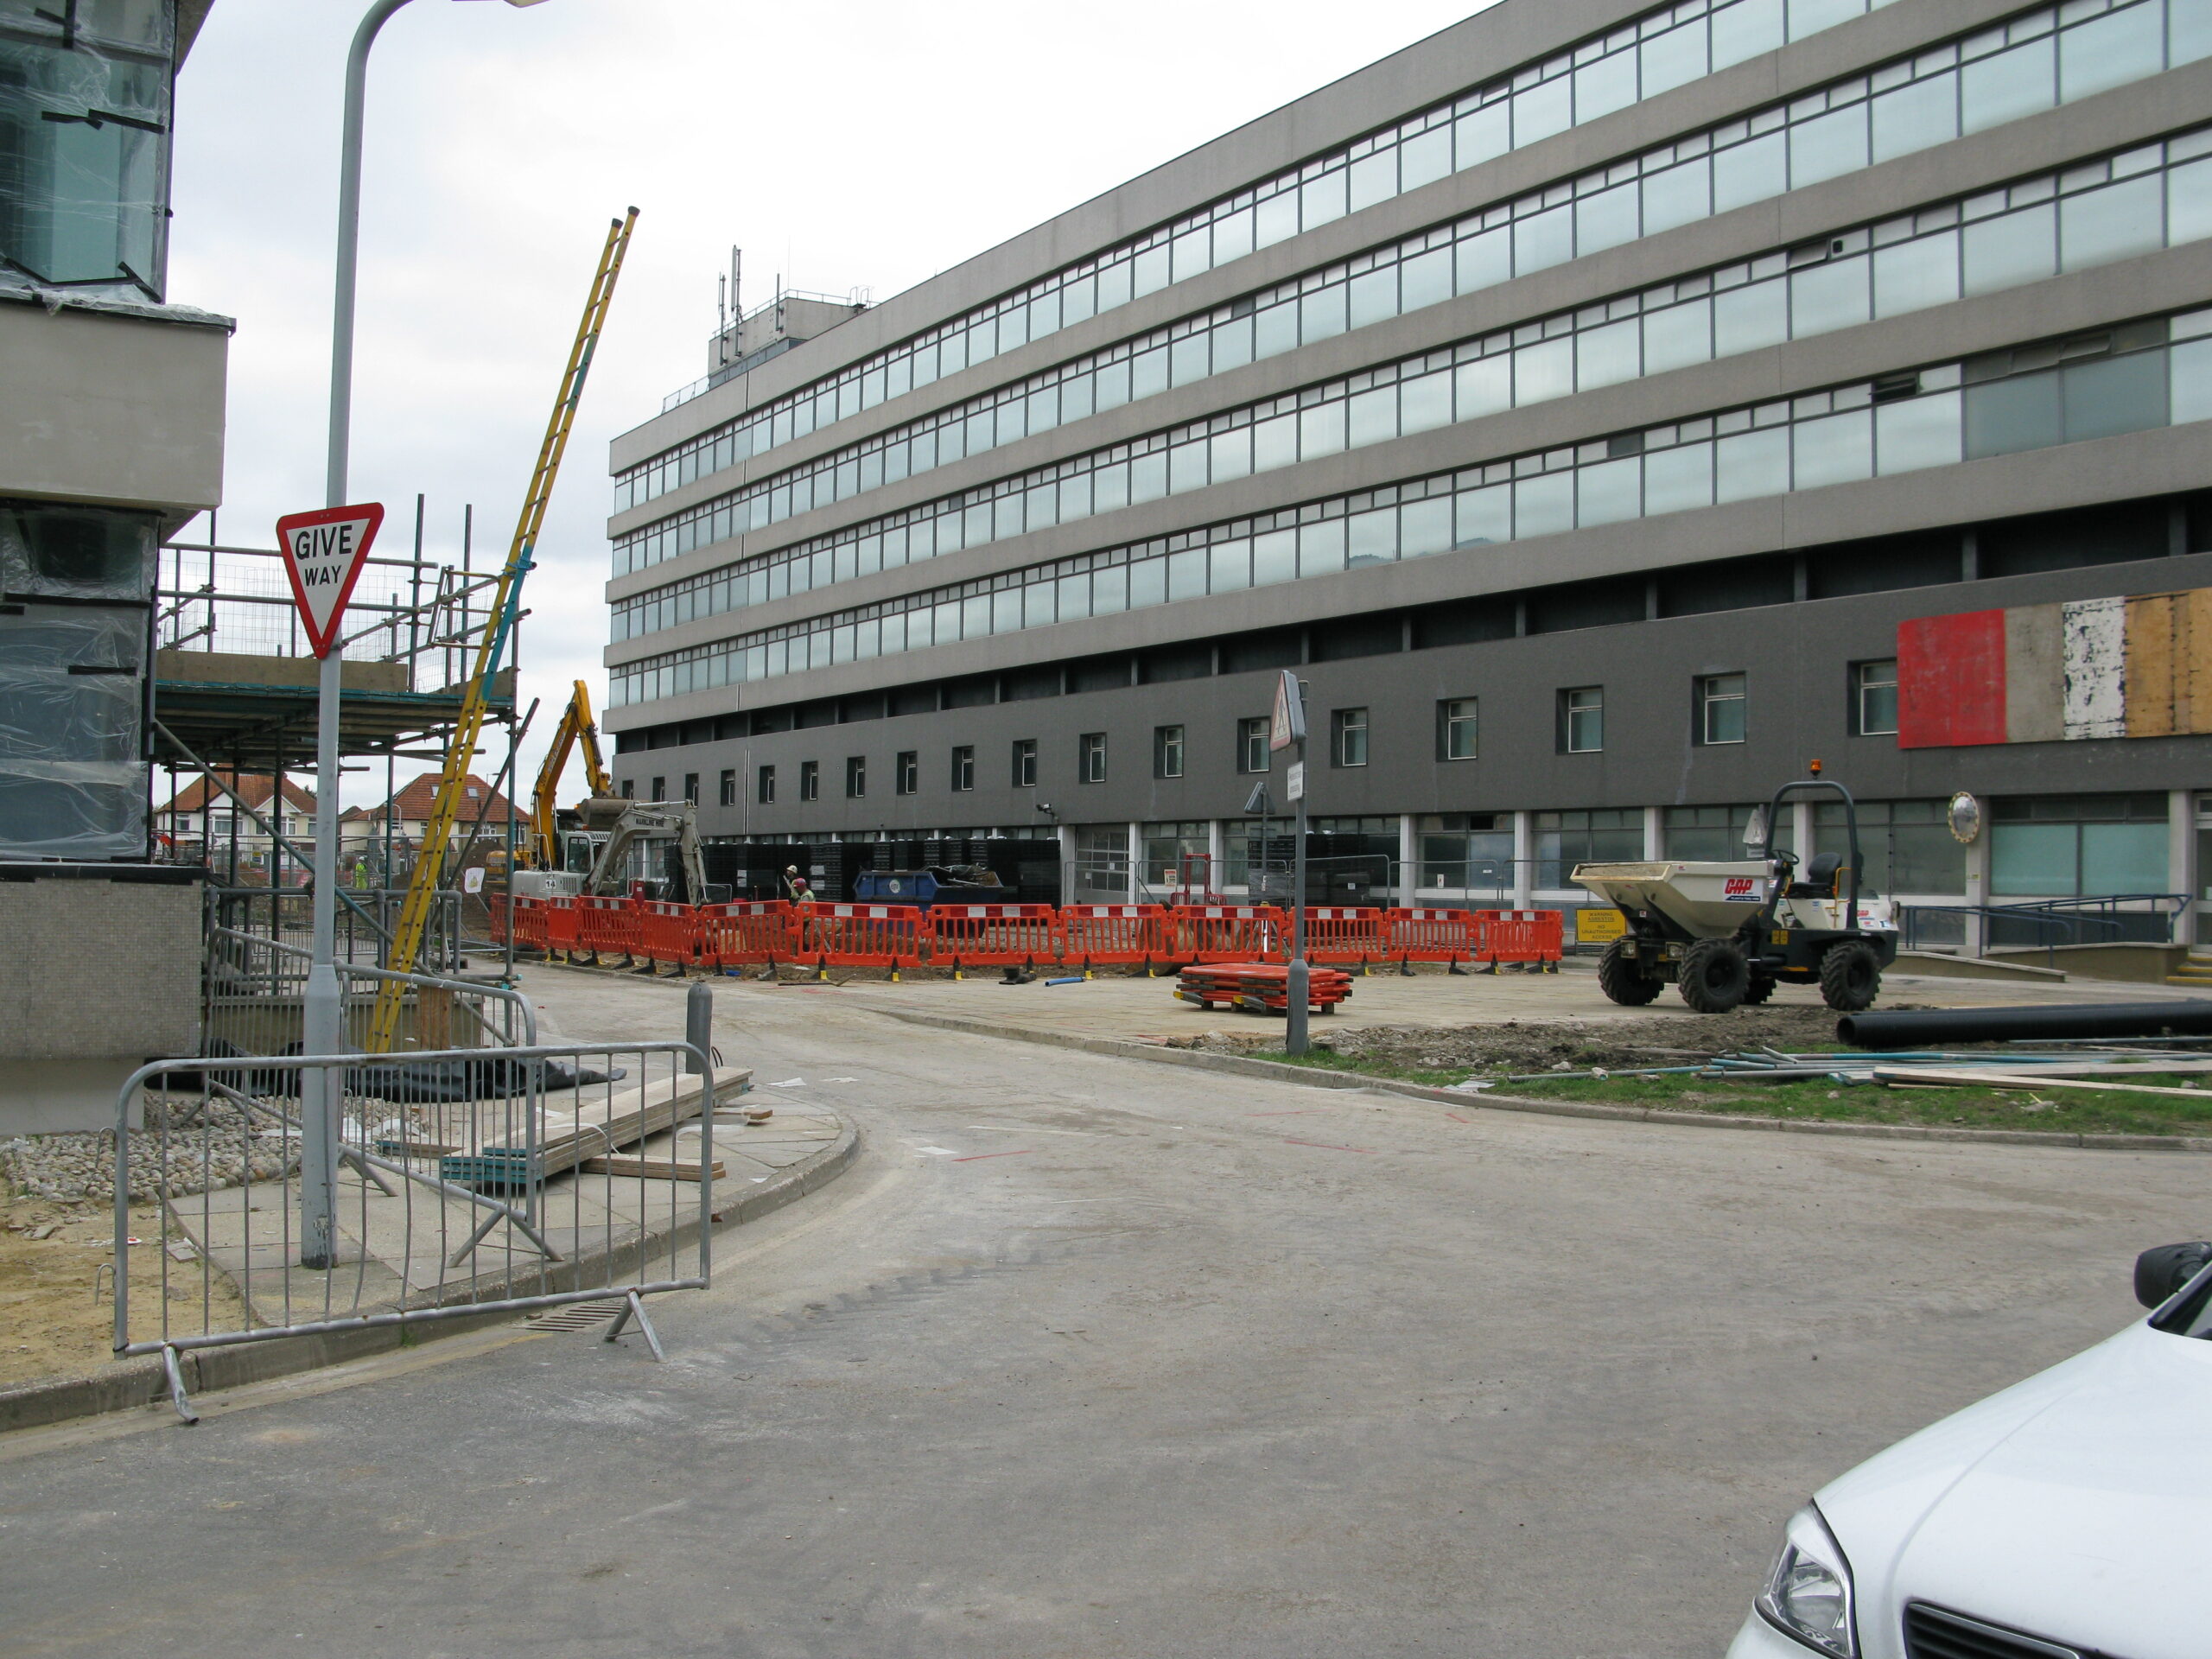 Removal of the covered way is complete, 5 Oct 2010